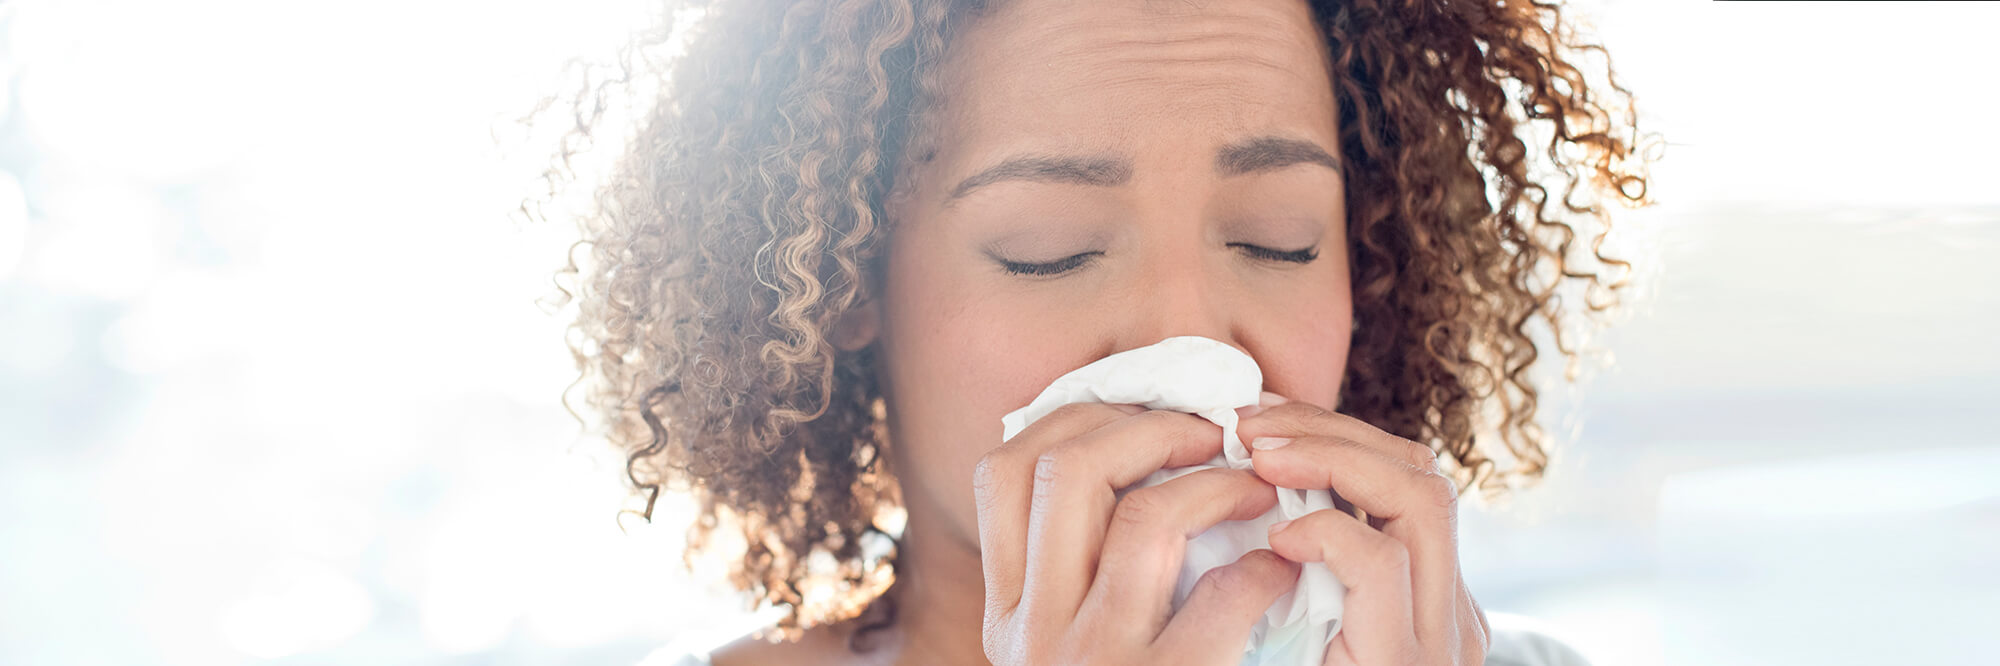 Is it a cold or allergies? | HealthPartners Blog